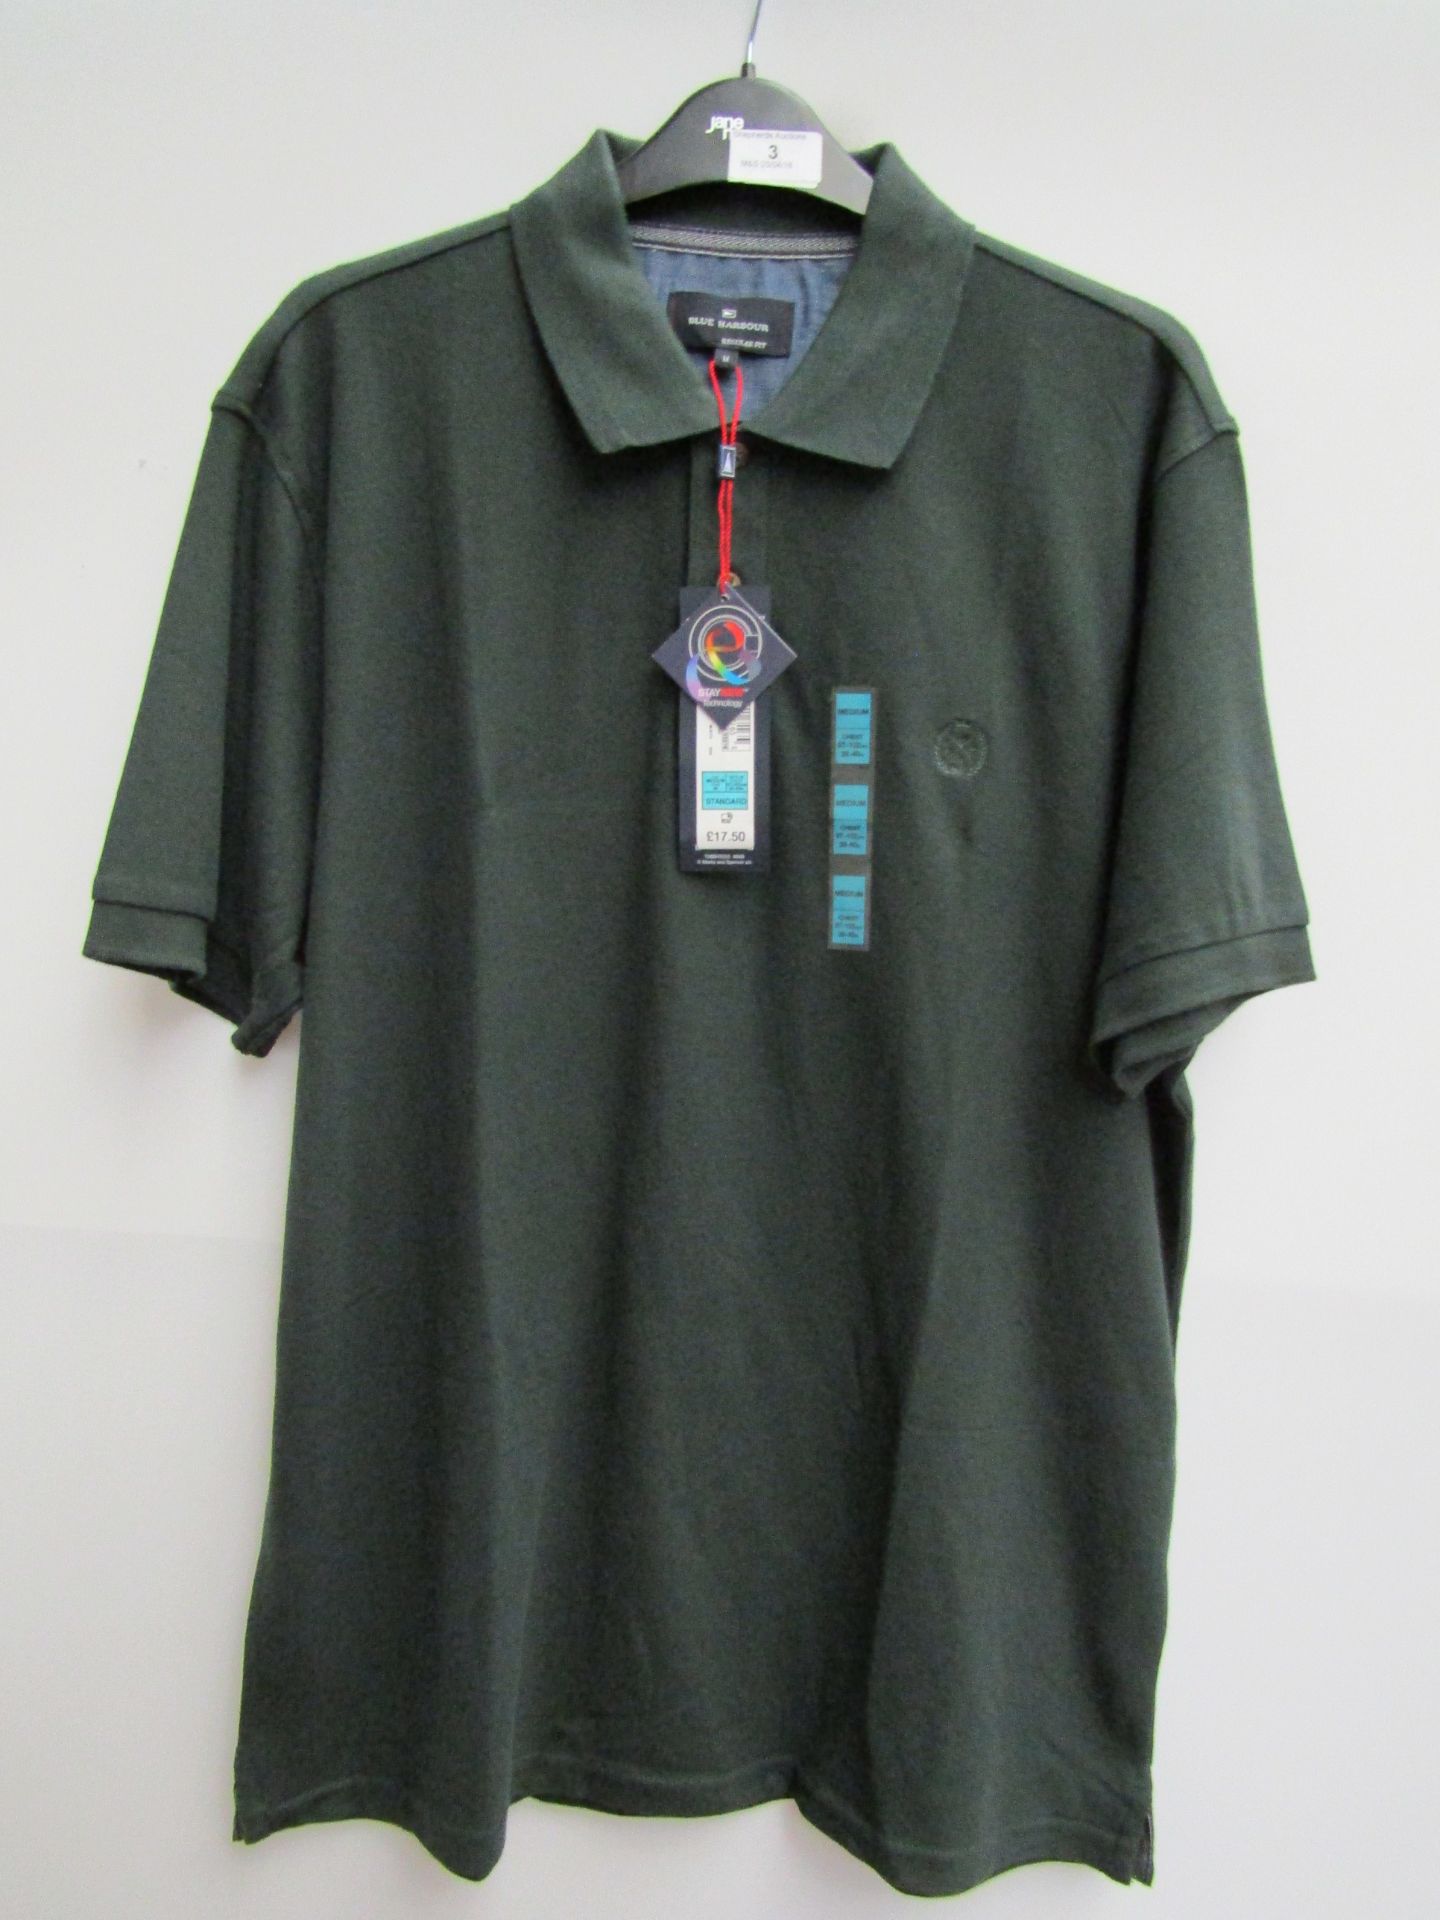 M&S Blue Harbour Mens Polo Shirt Size M with Tags. Please read lot zero prior to bidding.